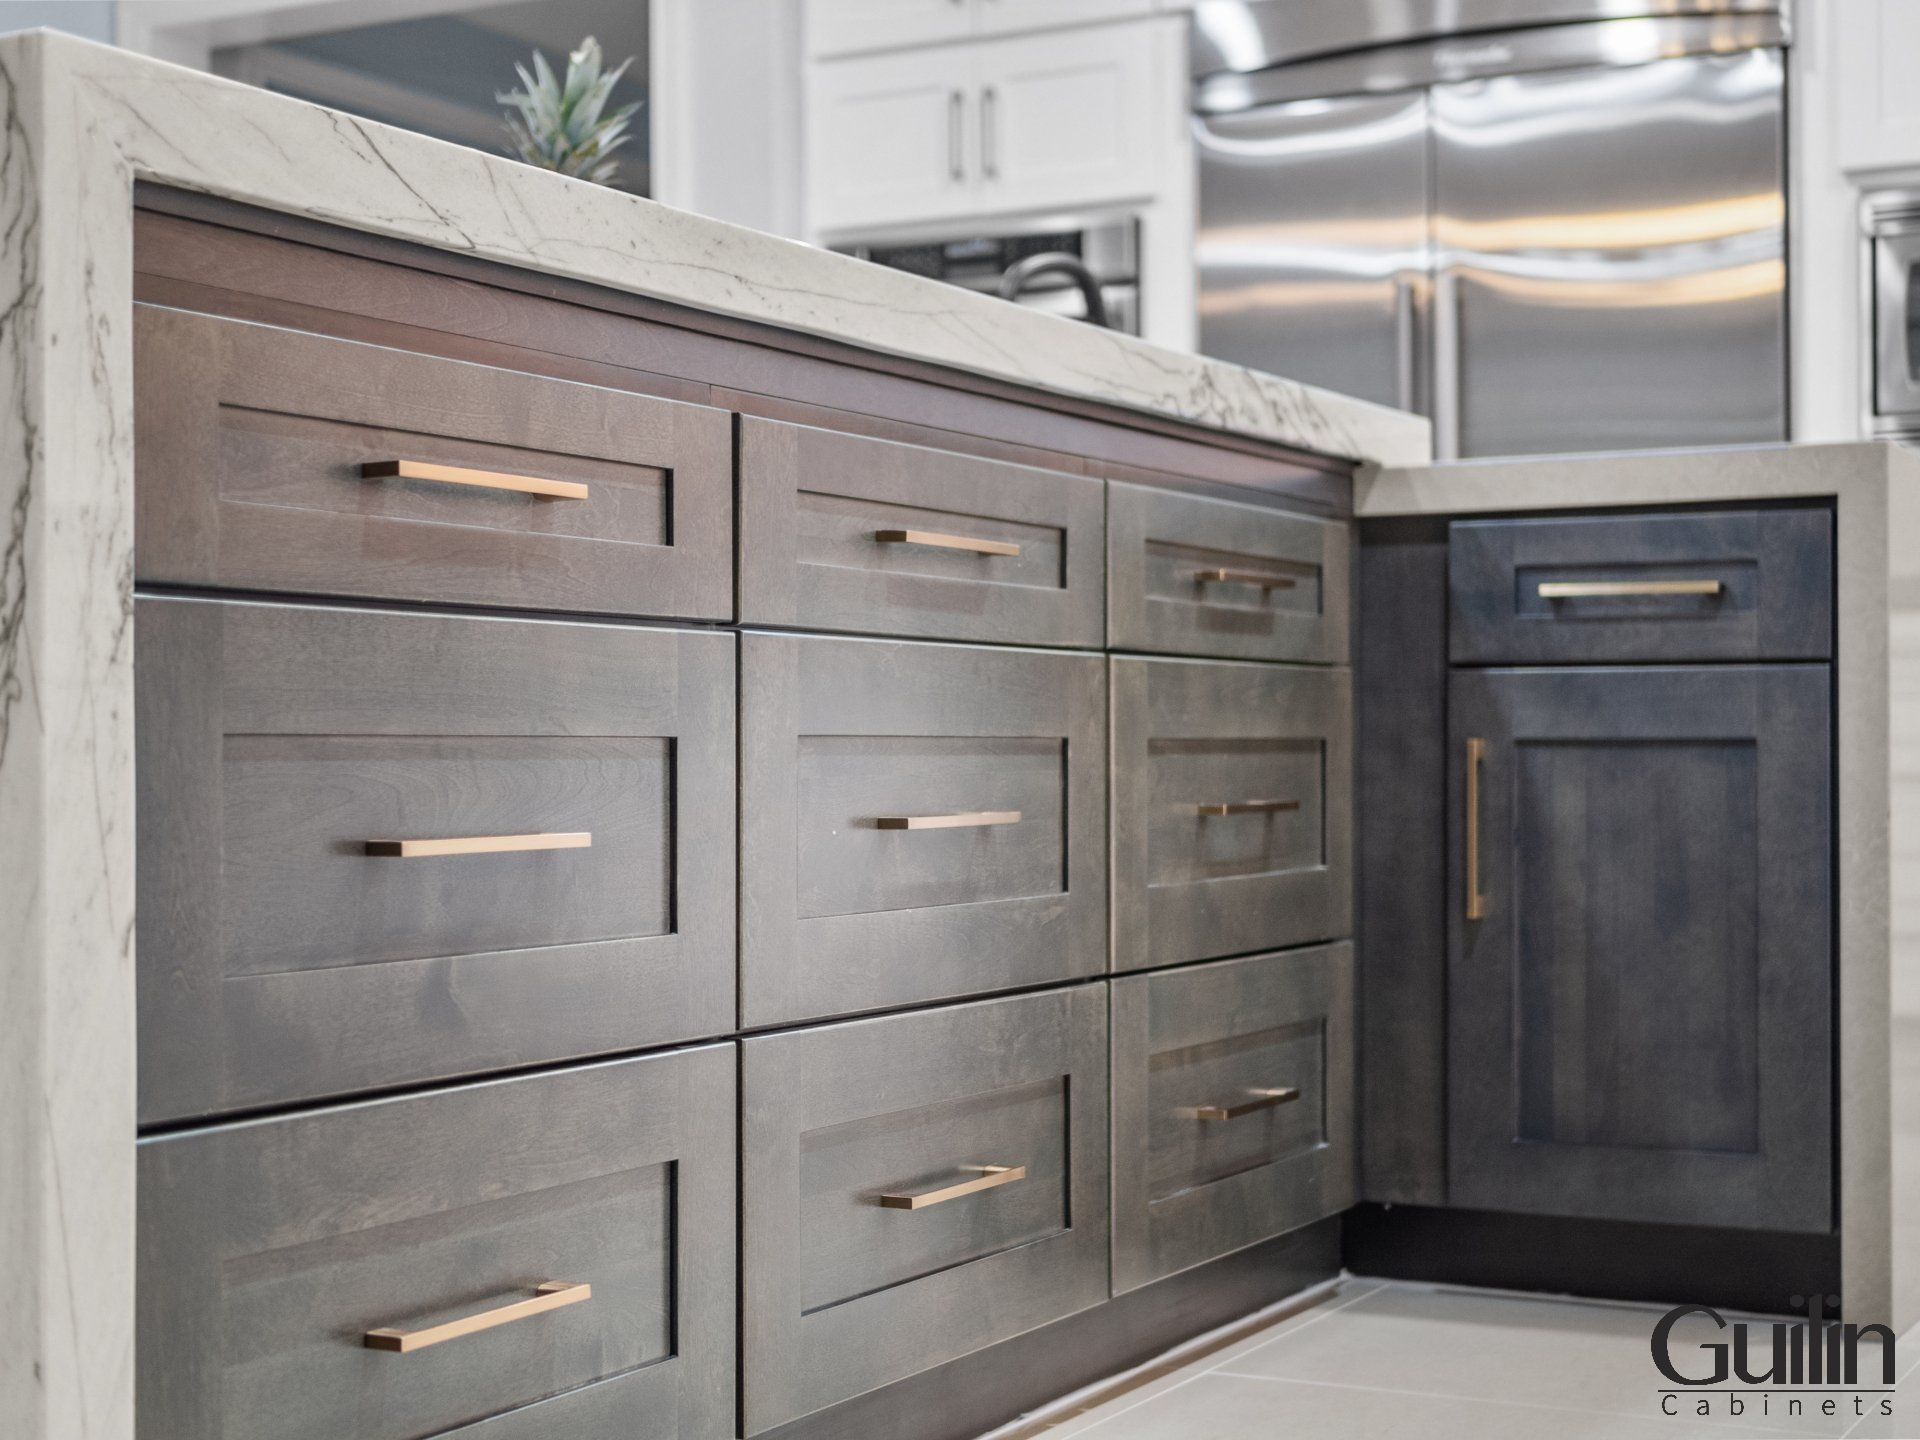 Adding an island is a perfect way to create more storage space to your Kitchen.